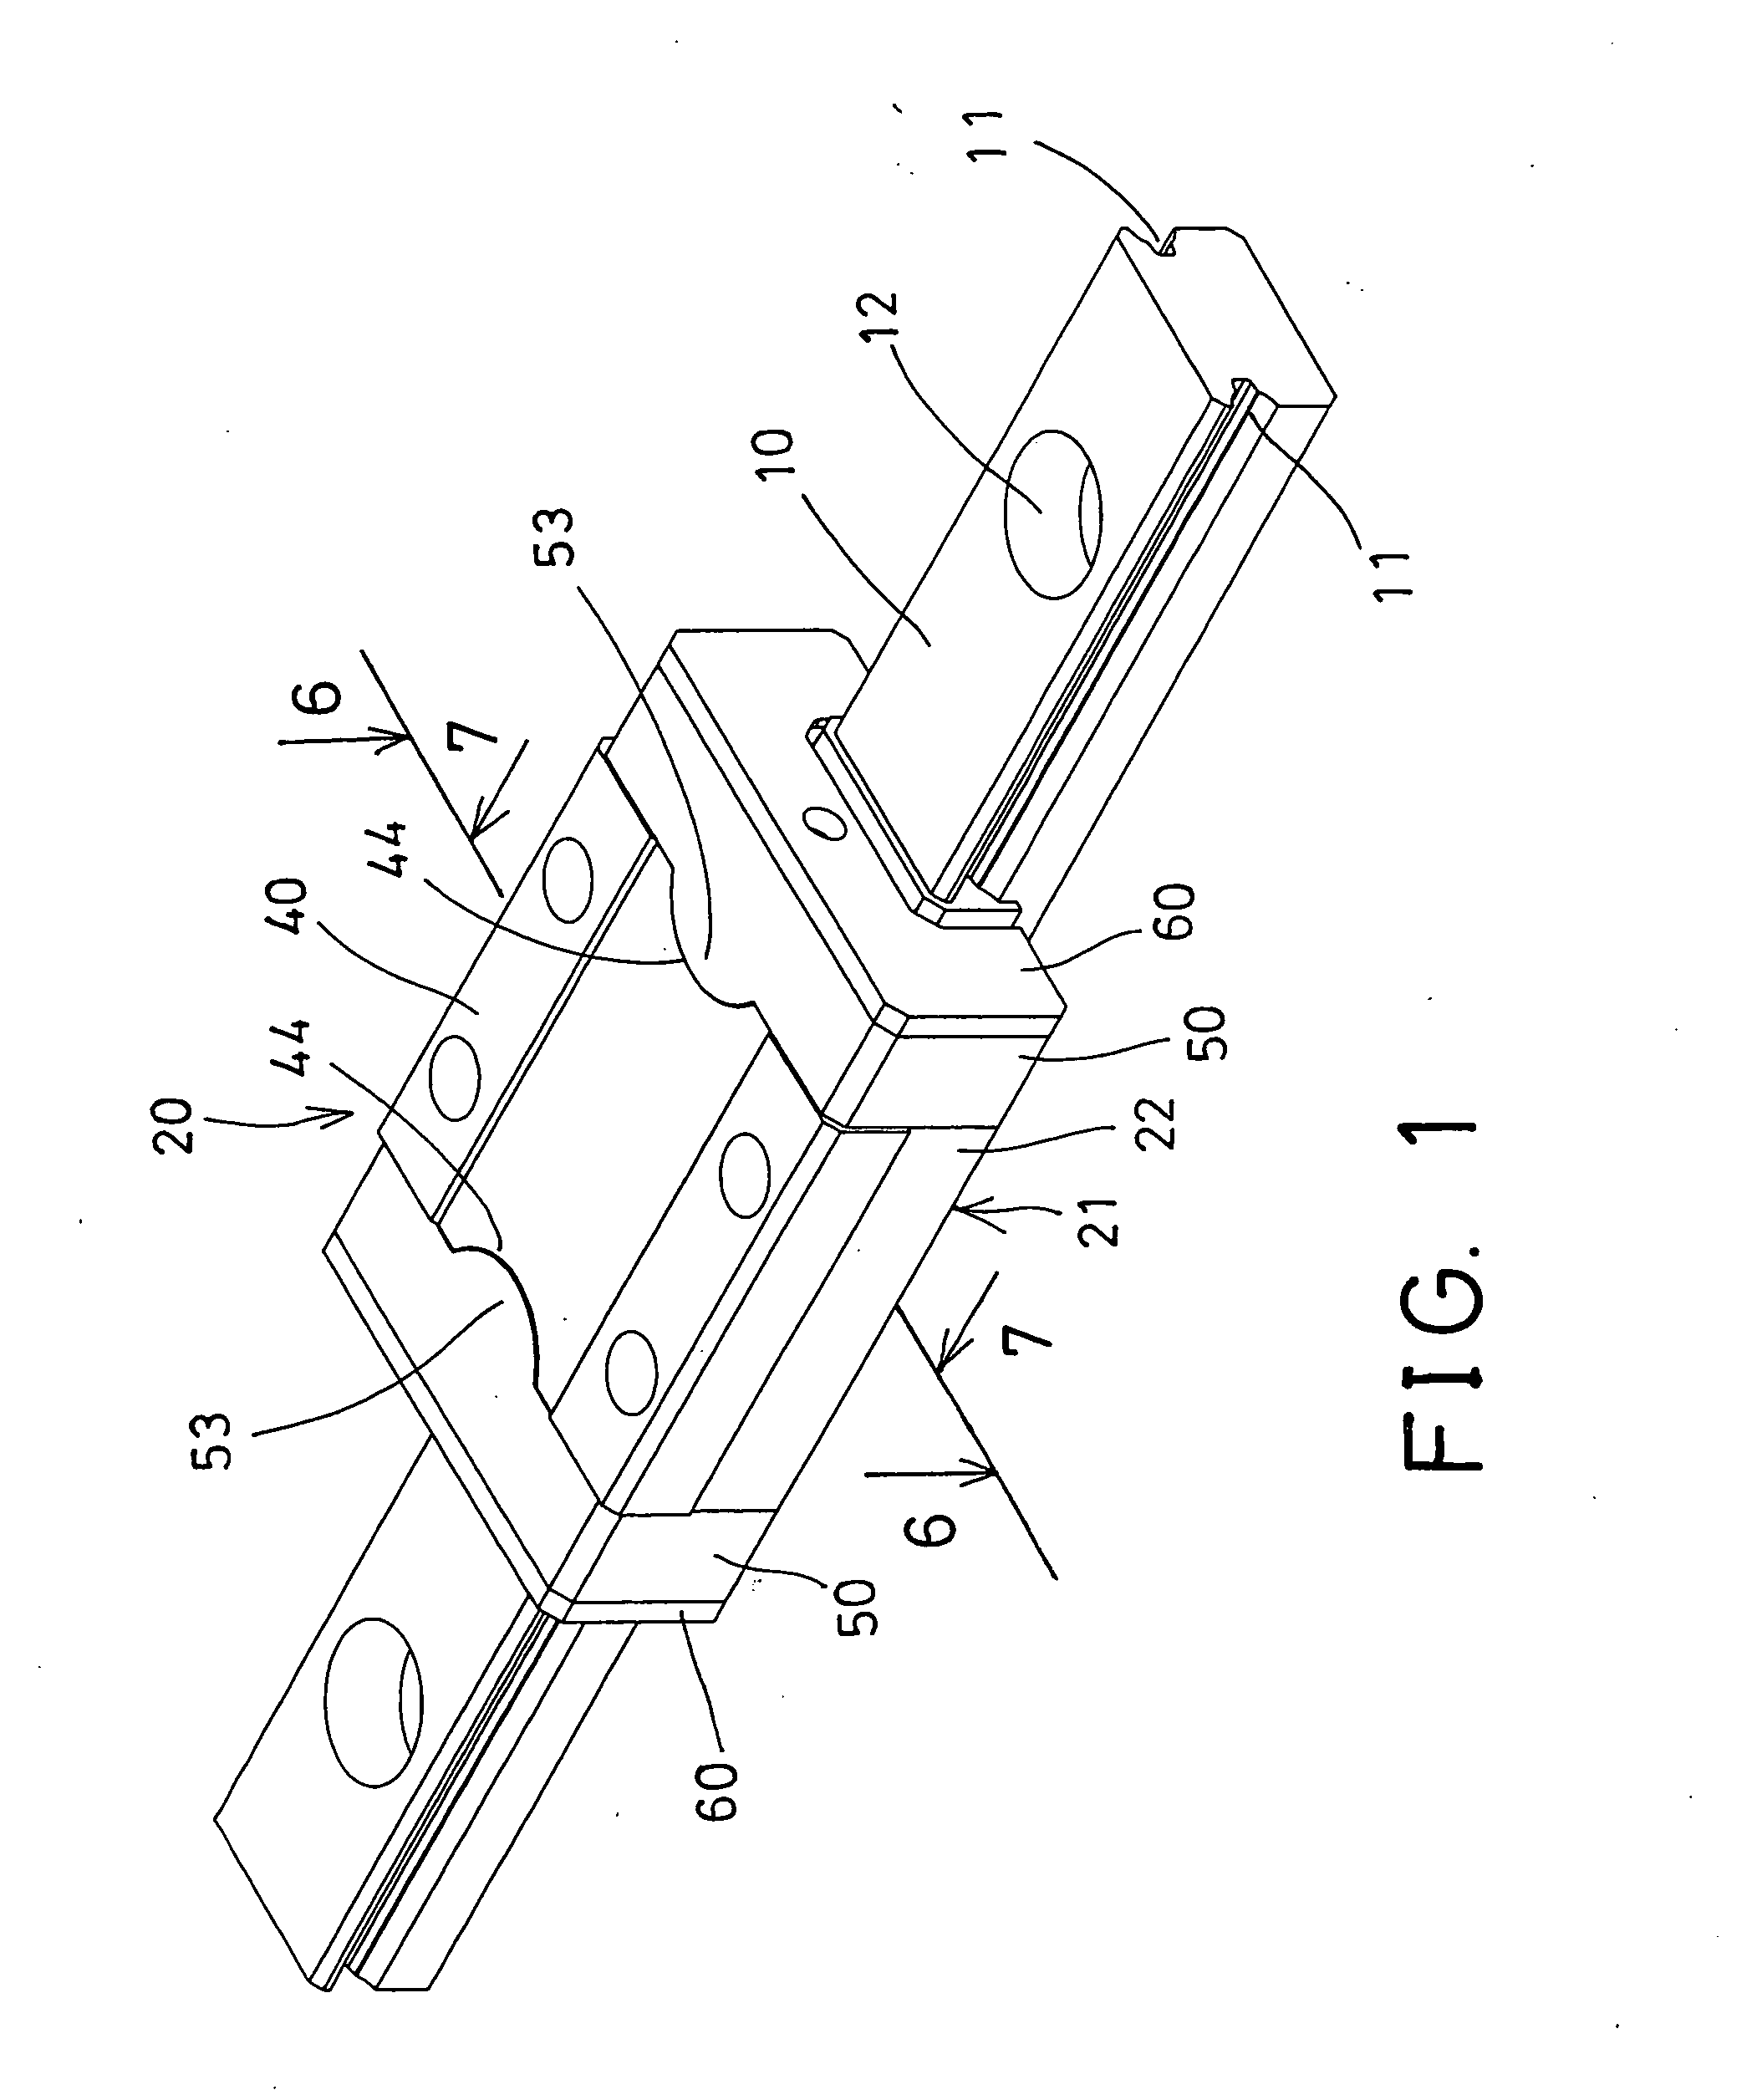 Linear motion guide device